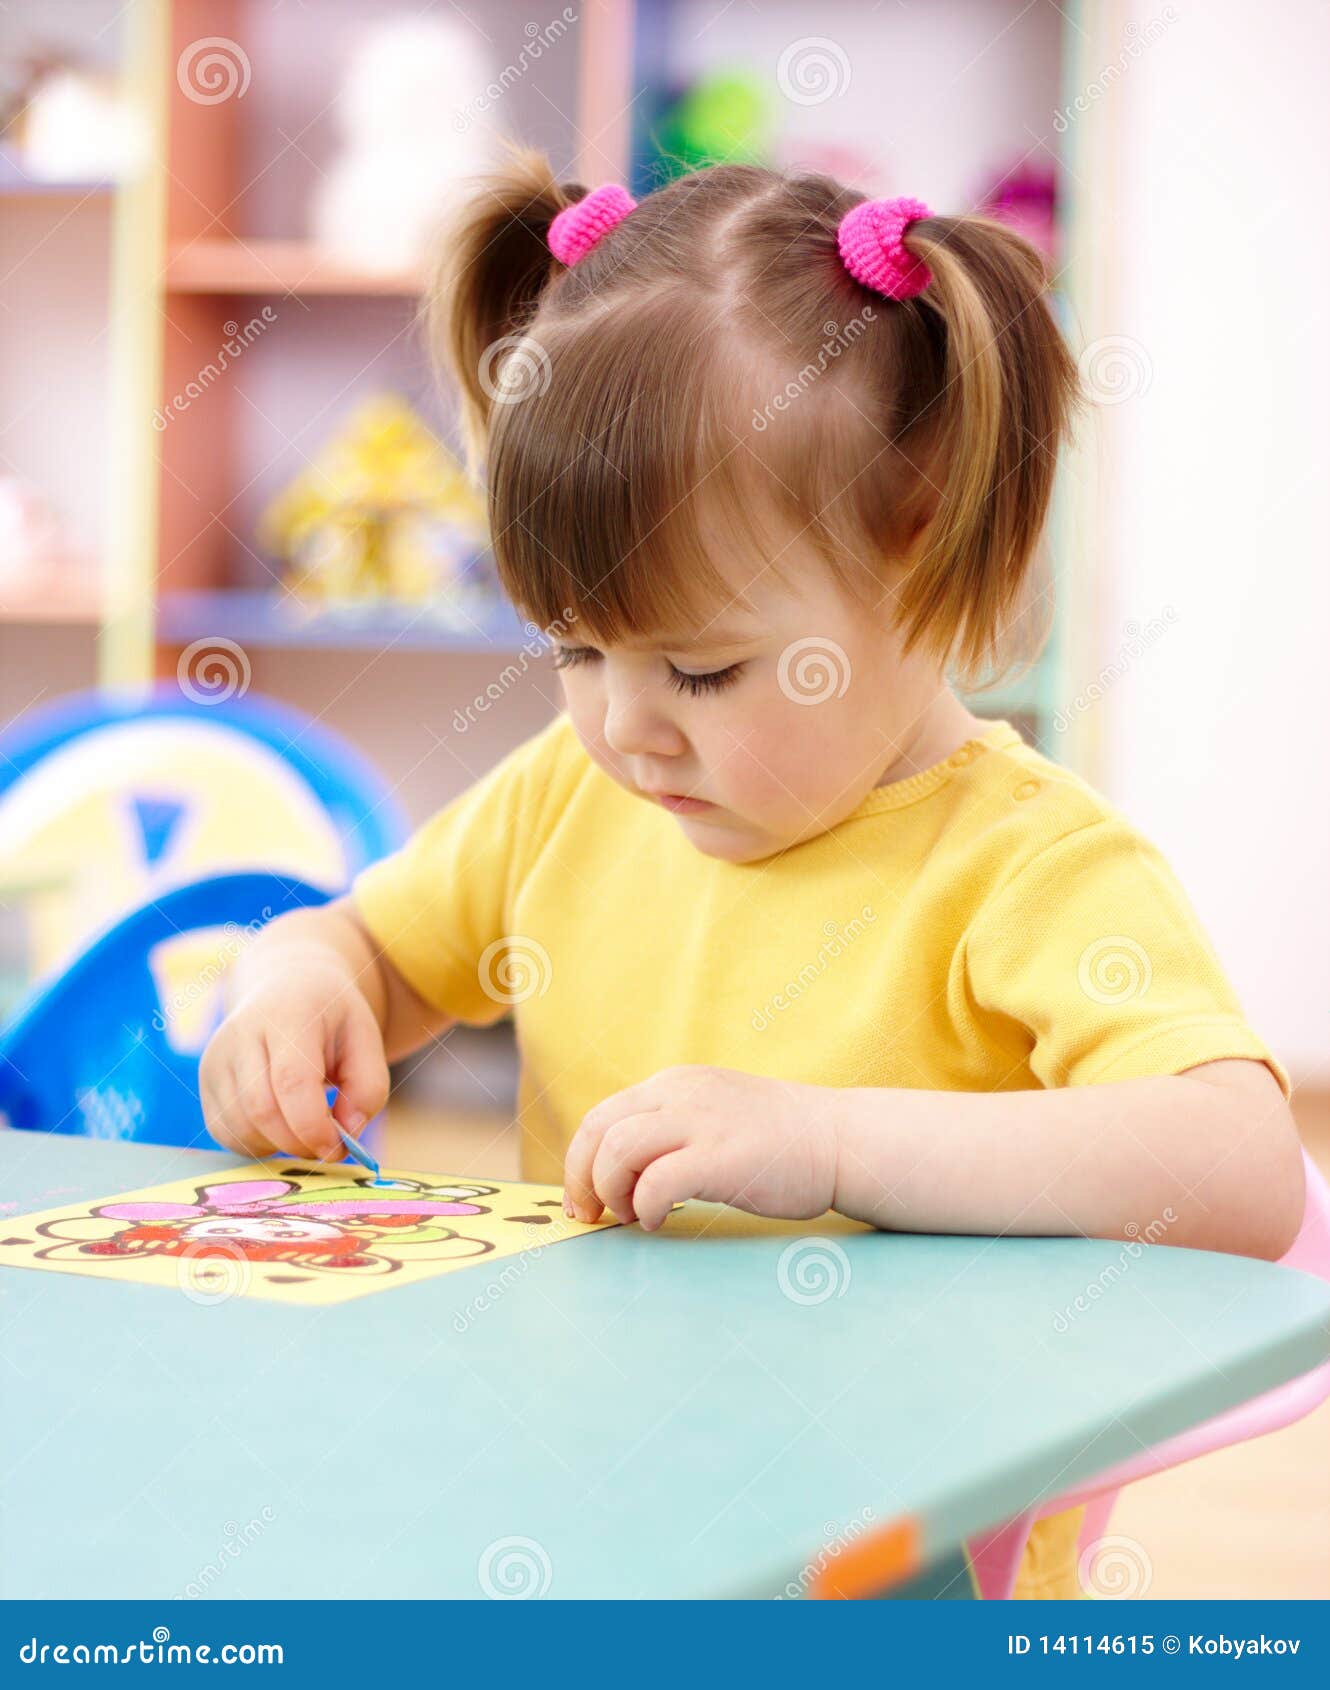 Little Girl Coloring A Picture In Preschool Royalty Free